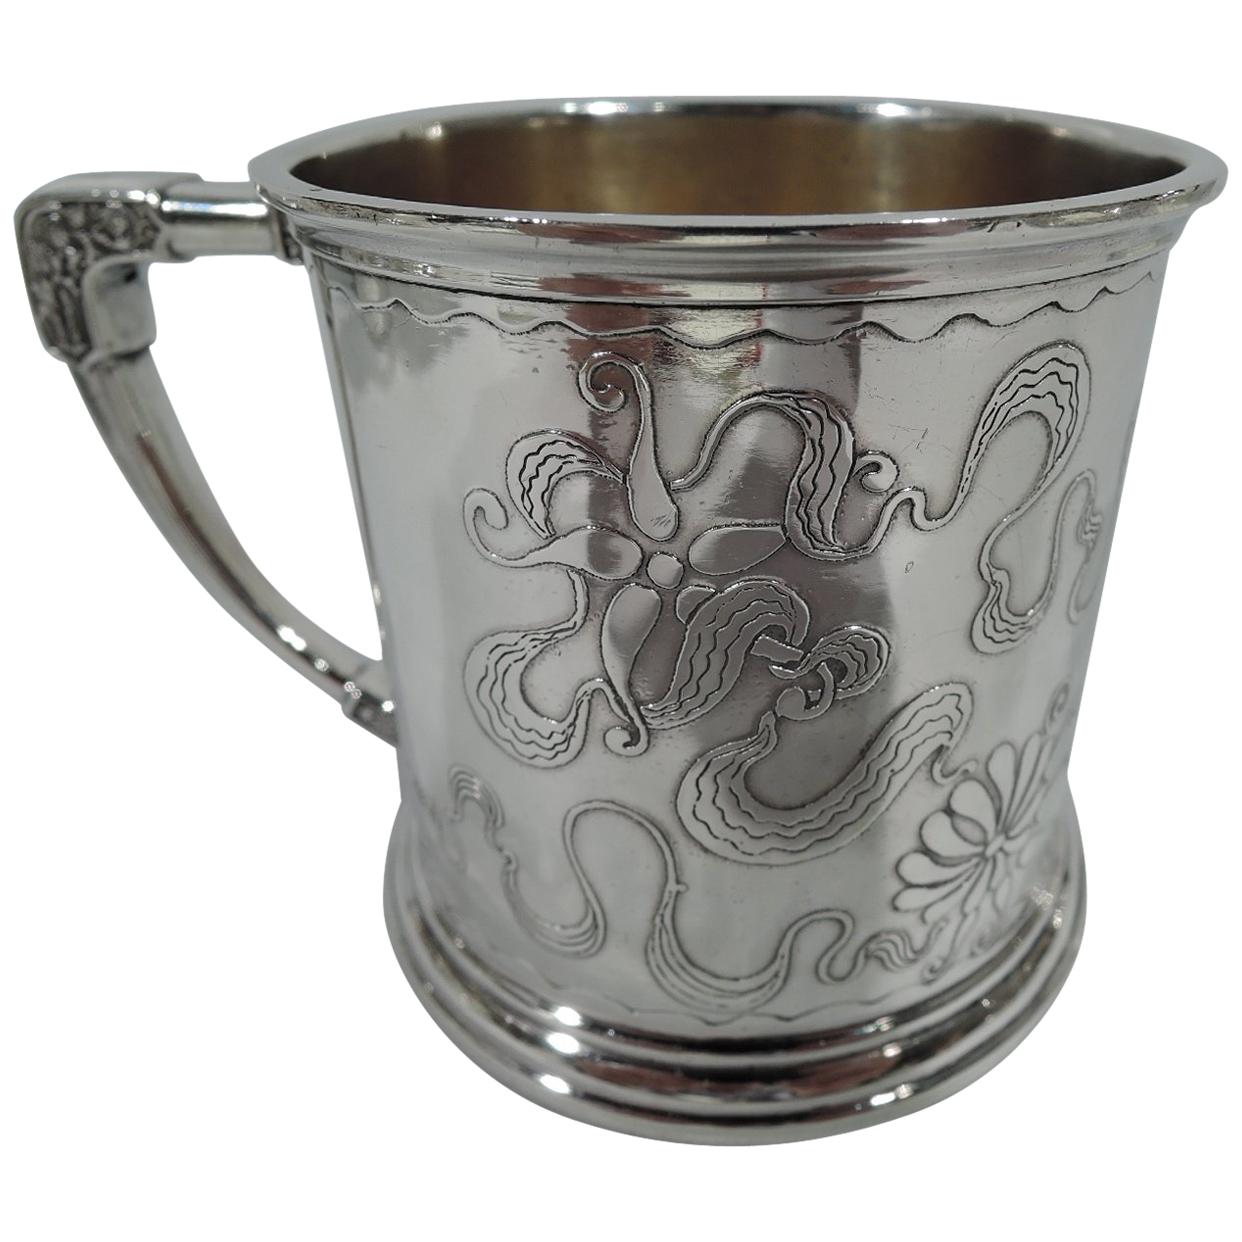 Stylistically Advanced Art Nouveau Sterling Silver Baby Cup by Whiting